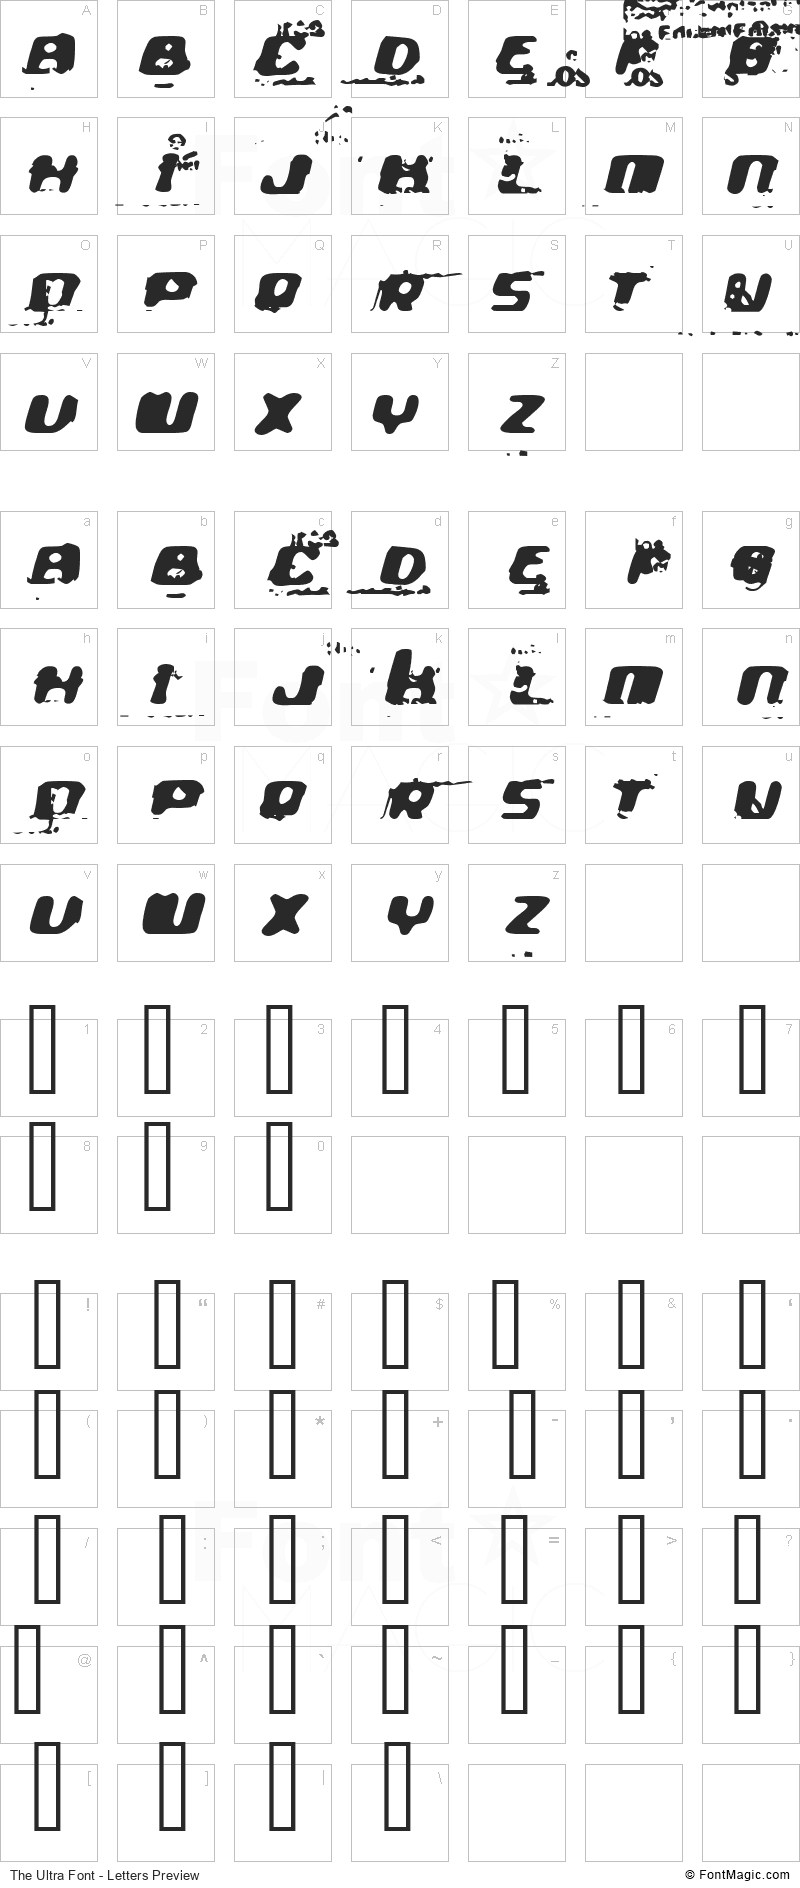 The Ultra Font - All Latters Preview Chart